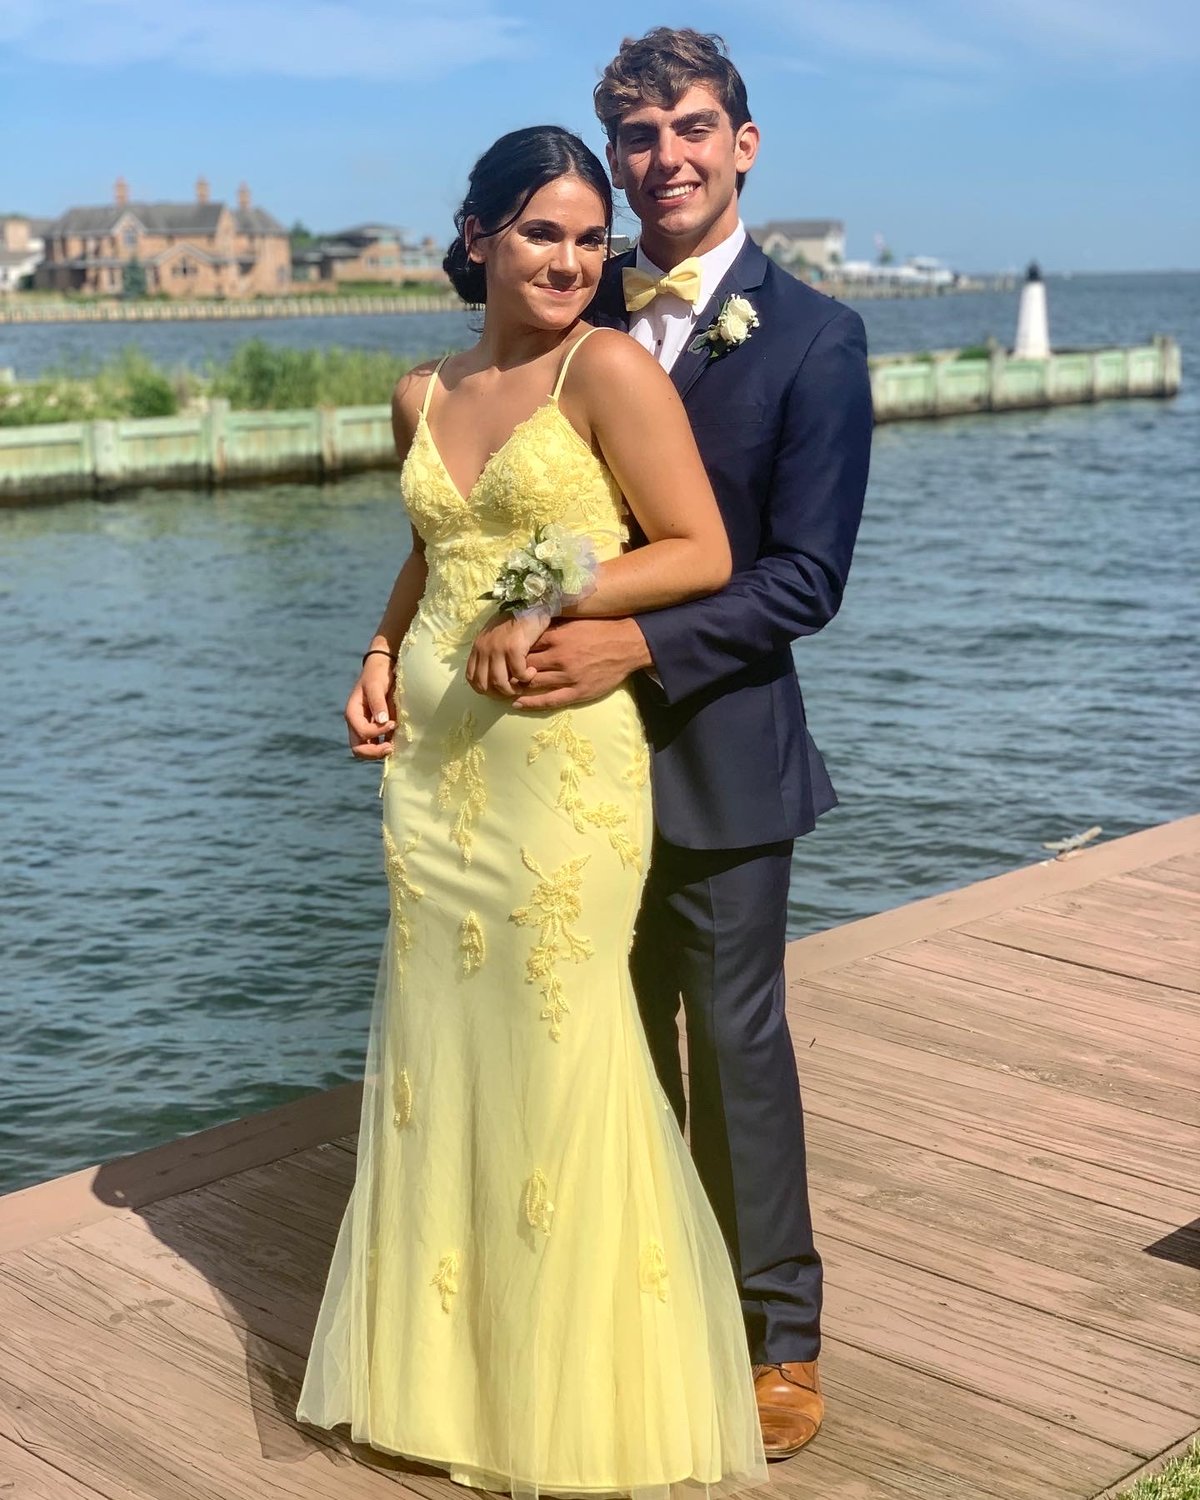 Nina Westerlind and Nick Aliani, of West Islip, are all smiles before prom.